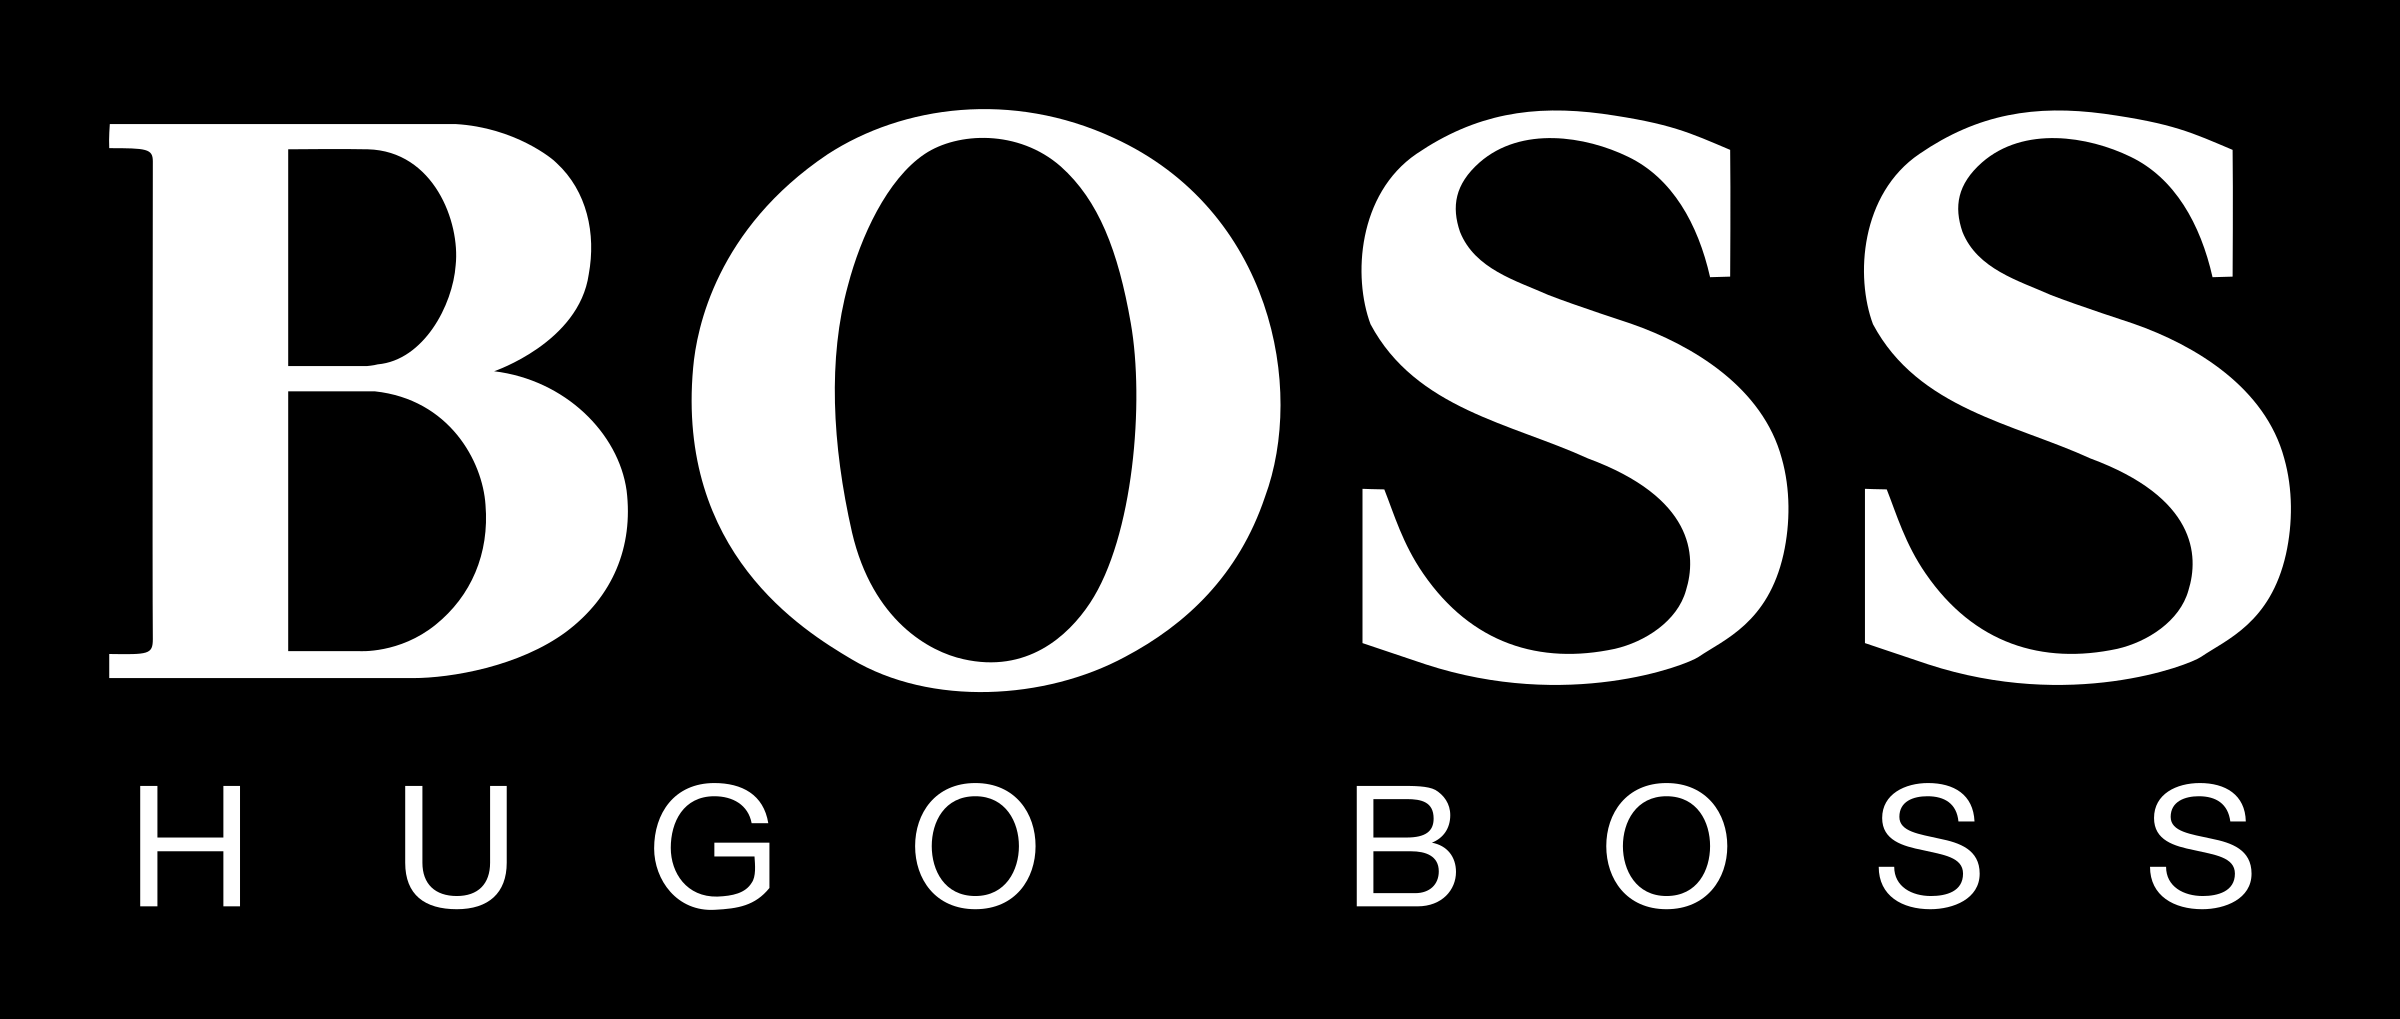 Hugo Boss Logo Black And White - Boss Black And White, Transparent background PNG HD thumbnail